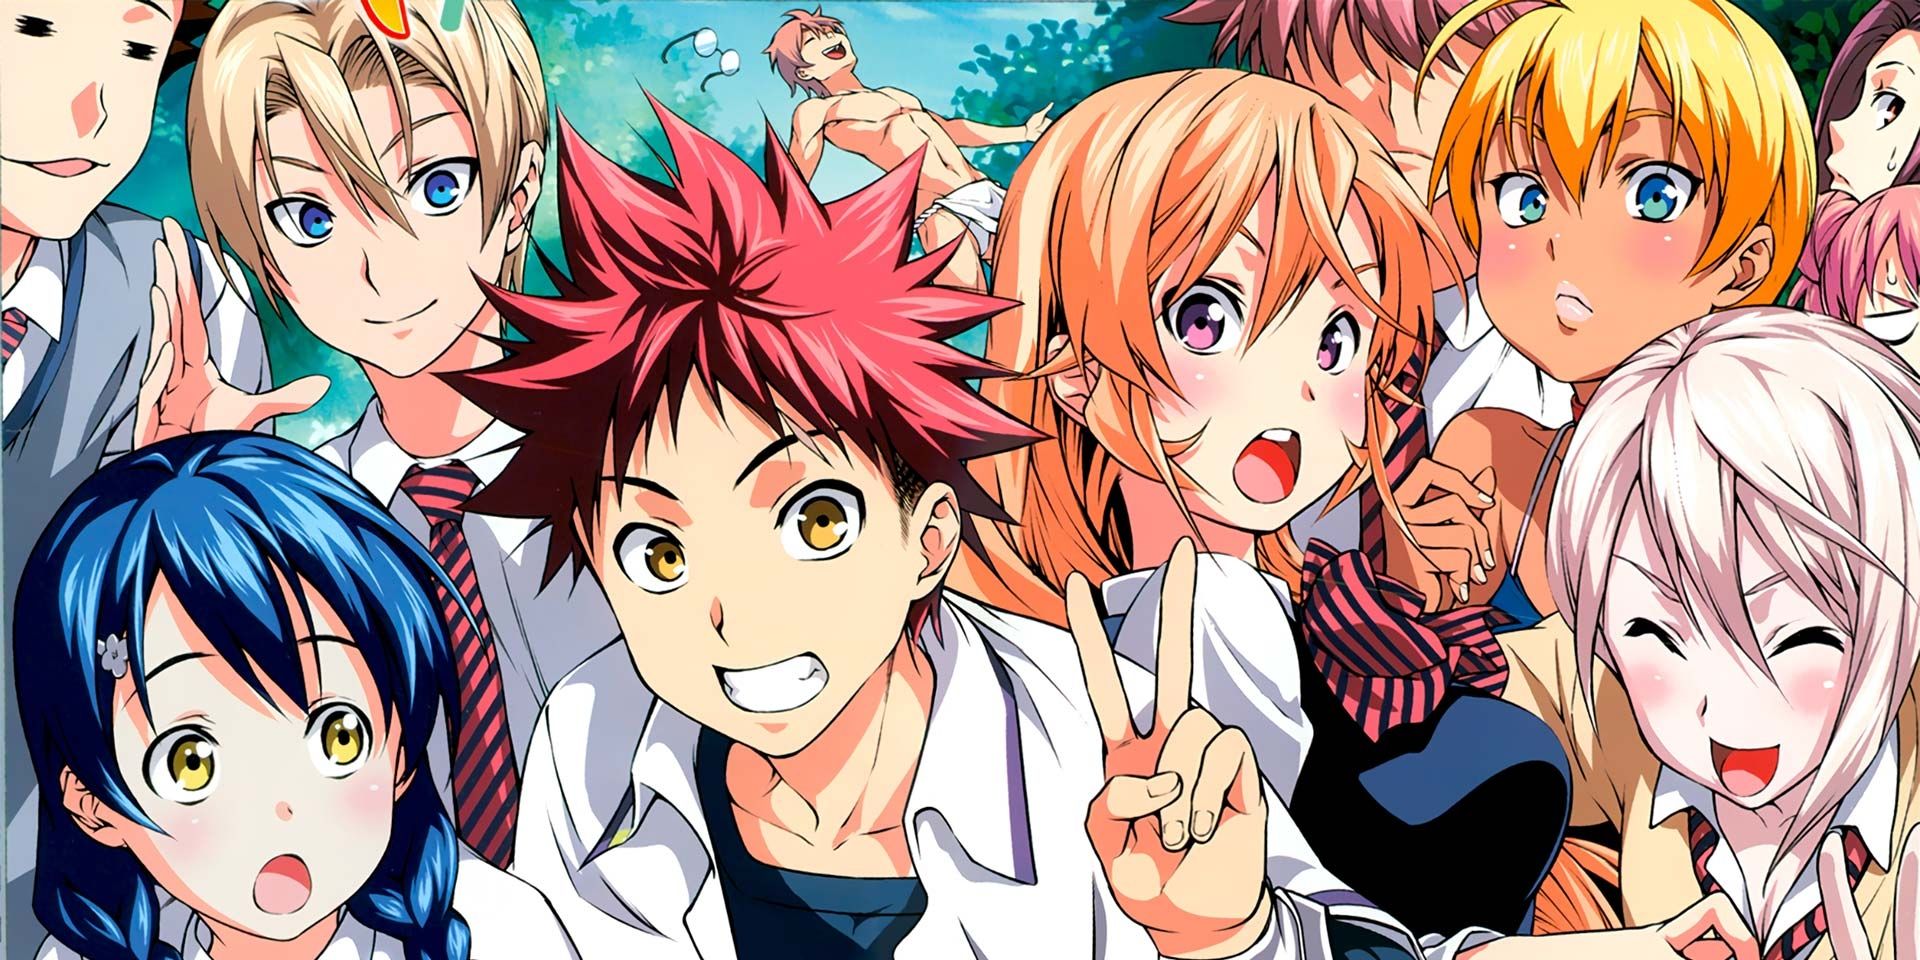 5 Years of Food Wars: How an Anime About Cooking Became a Household Name